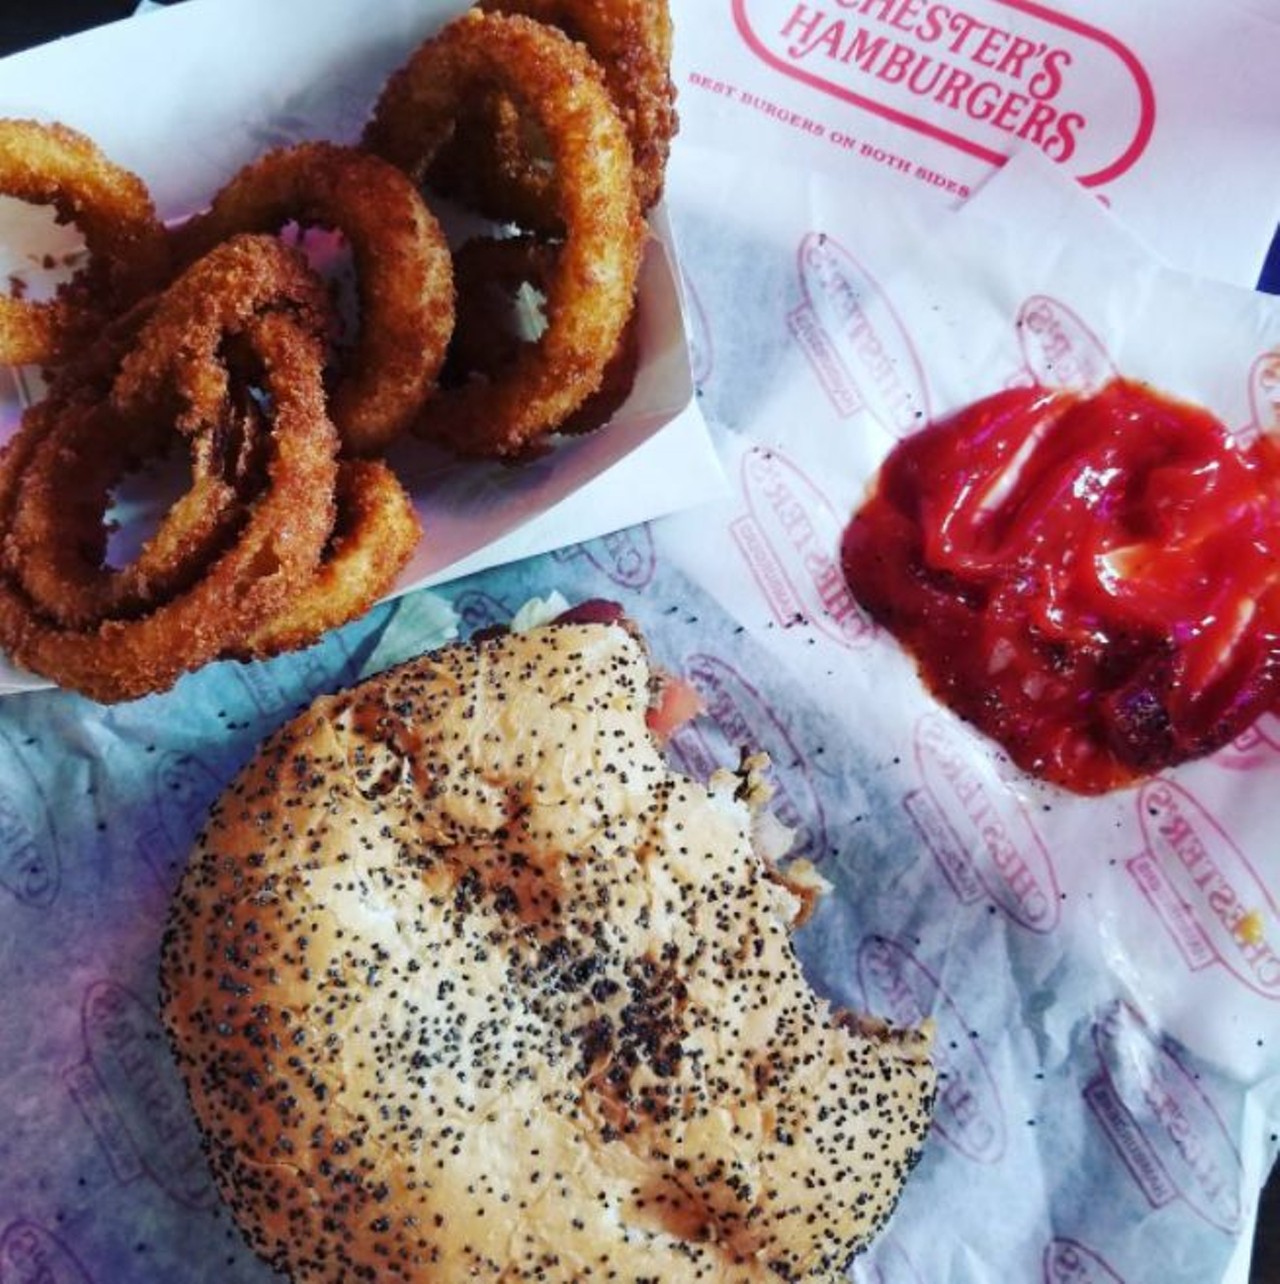 Chester's Hamburgers
Multiple locations, chestershamburgers.com
The fresh poppy seed bun is a trademark of beloved burger joint Chester&#146;s.
Photo via Instagram 
pahurtado12
